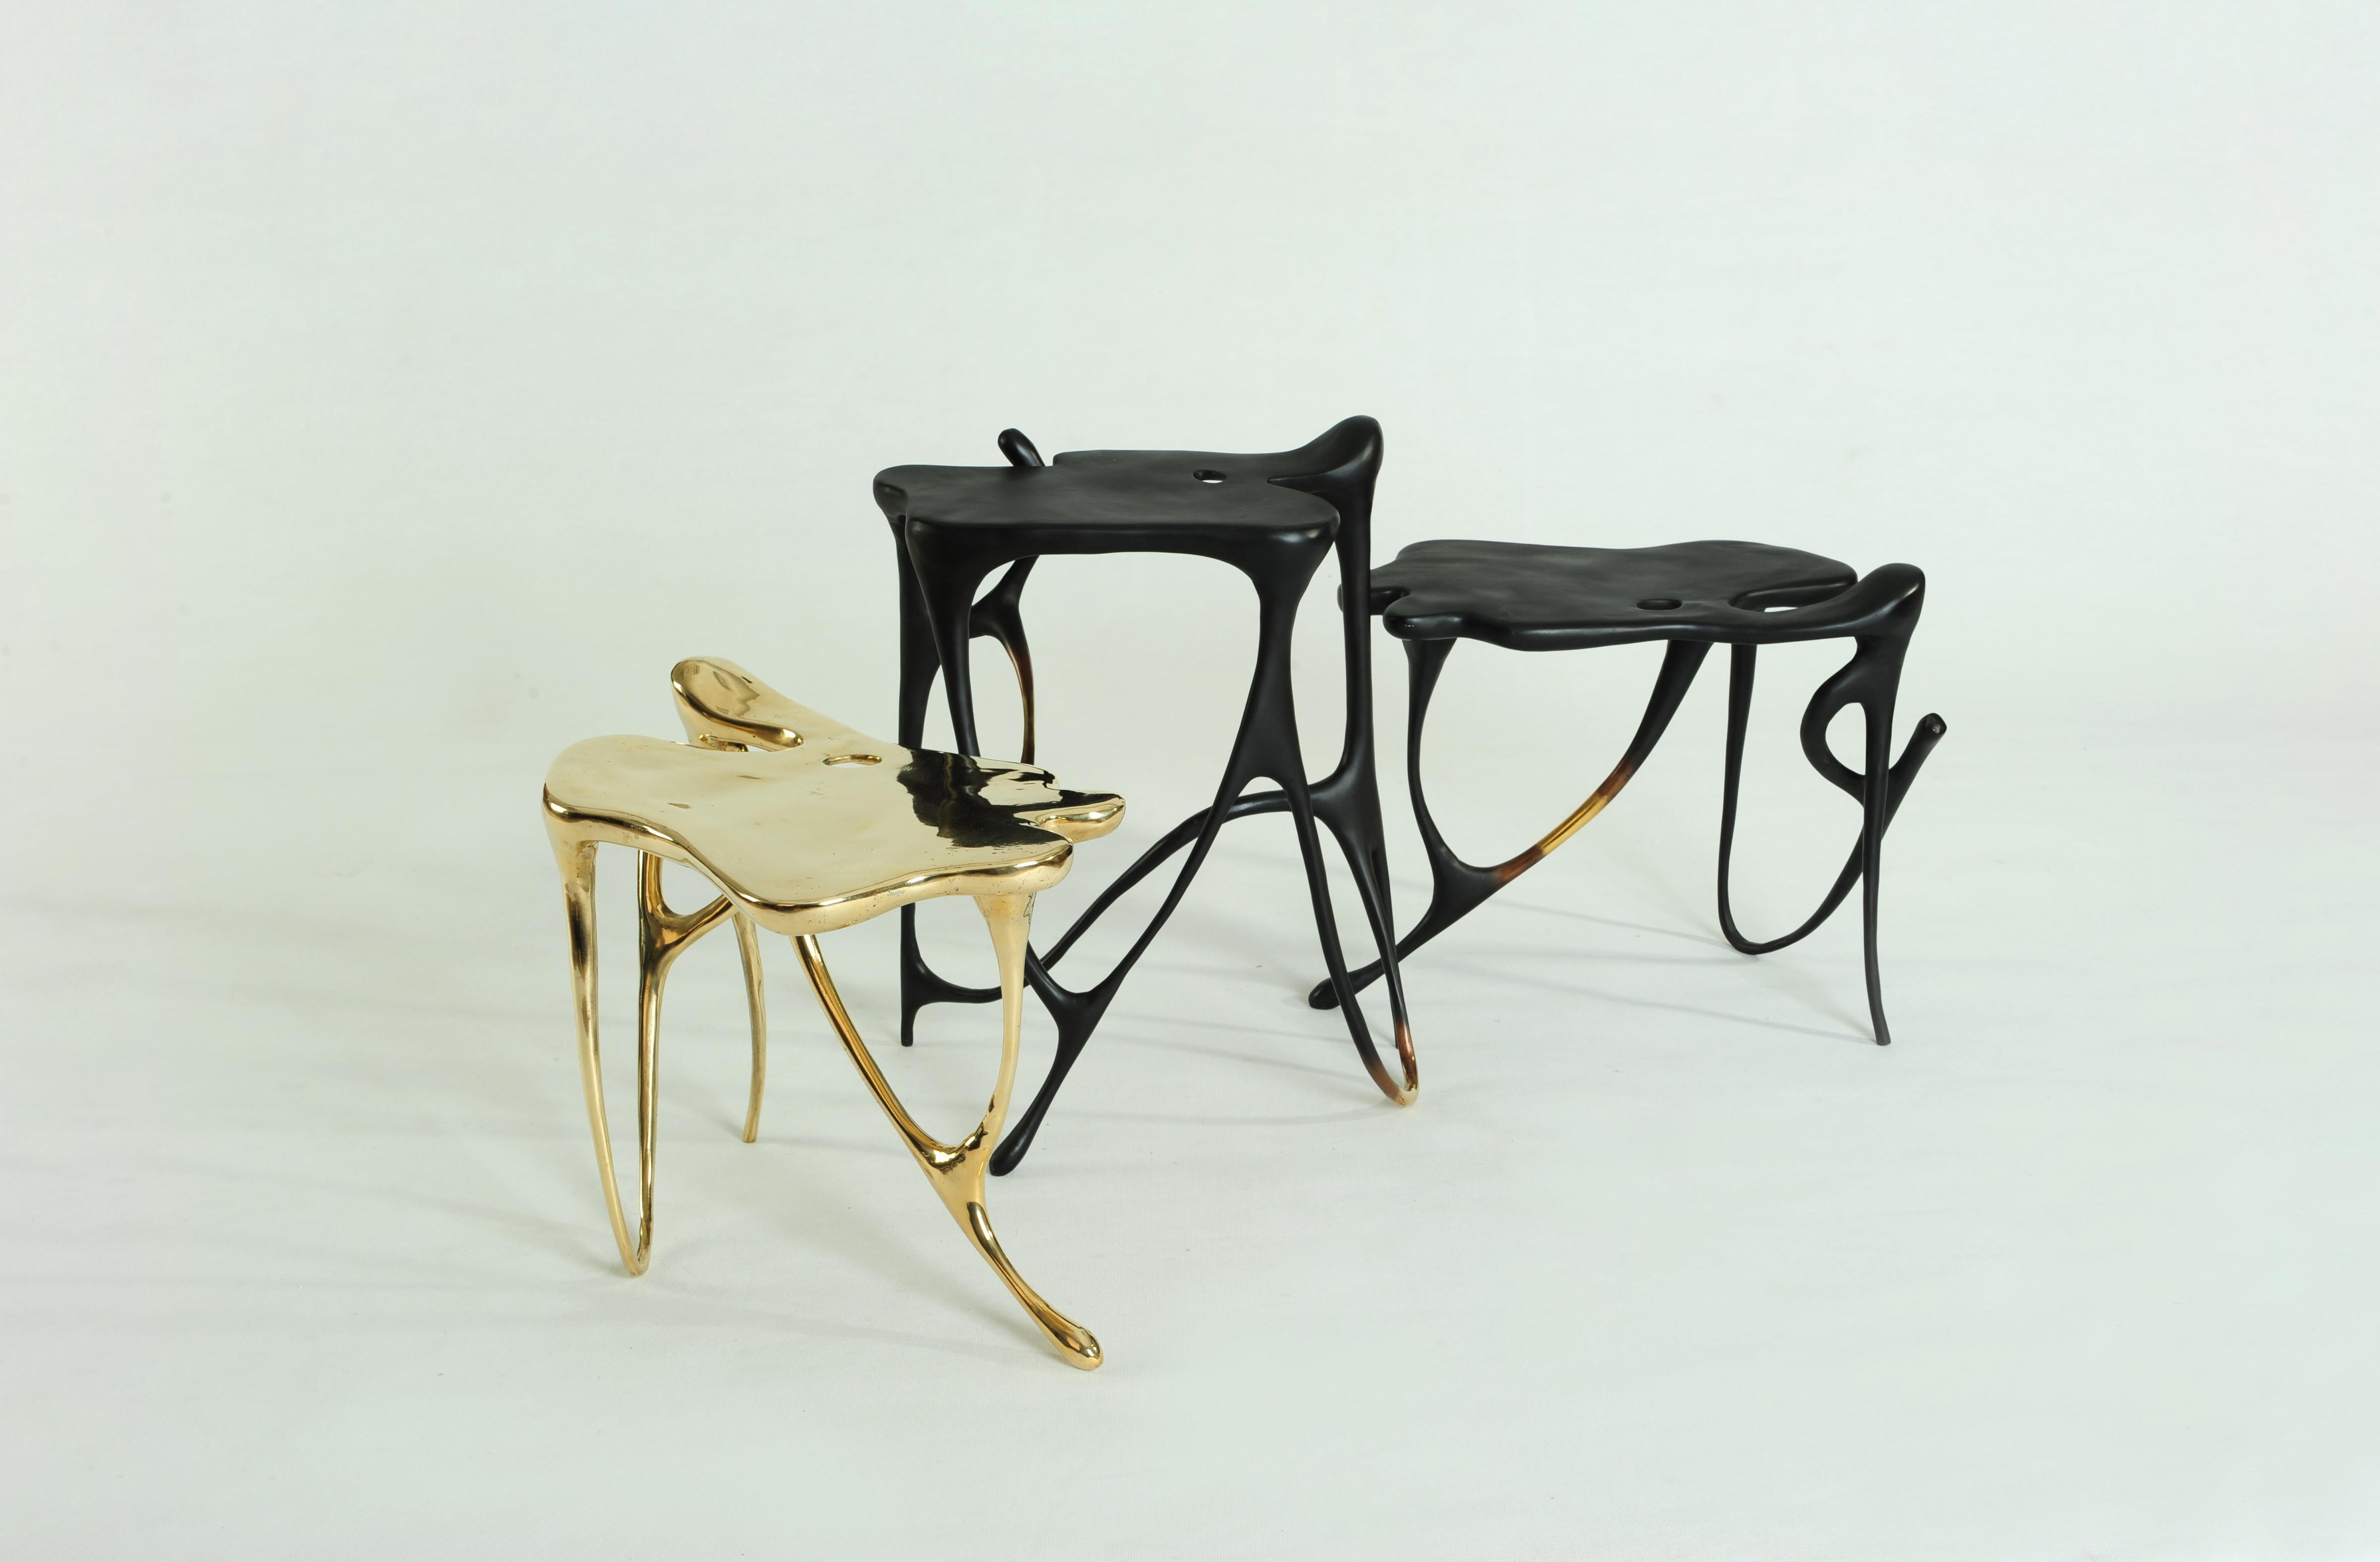 Calligraphic Sculpted Brass Side Table by Misaya 4